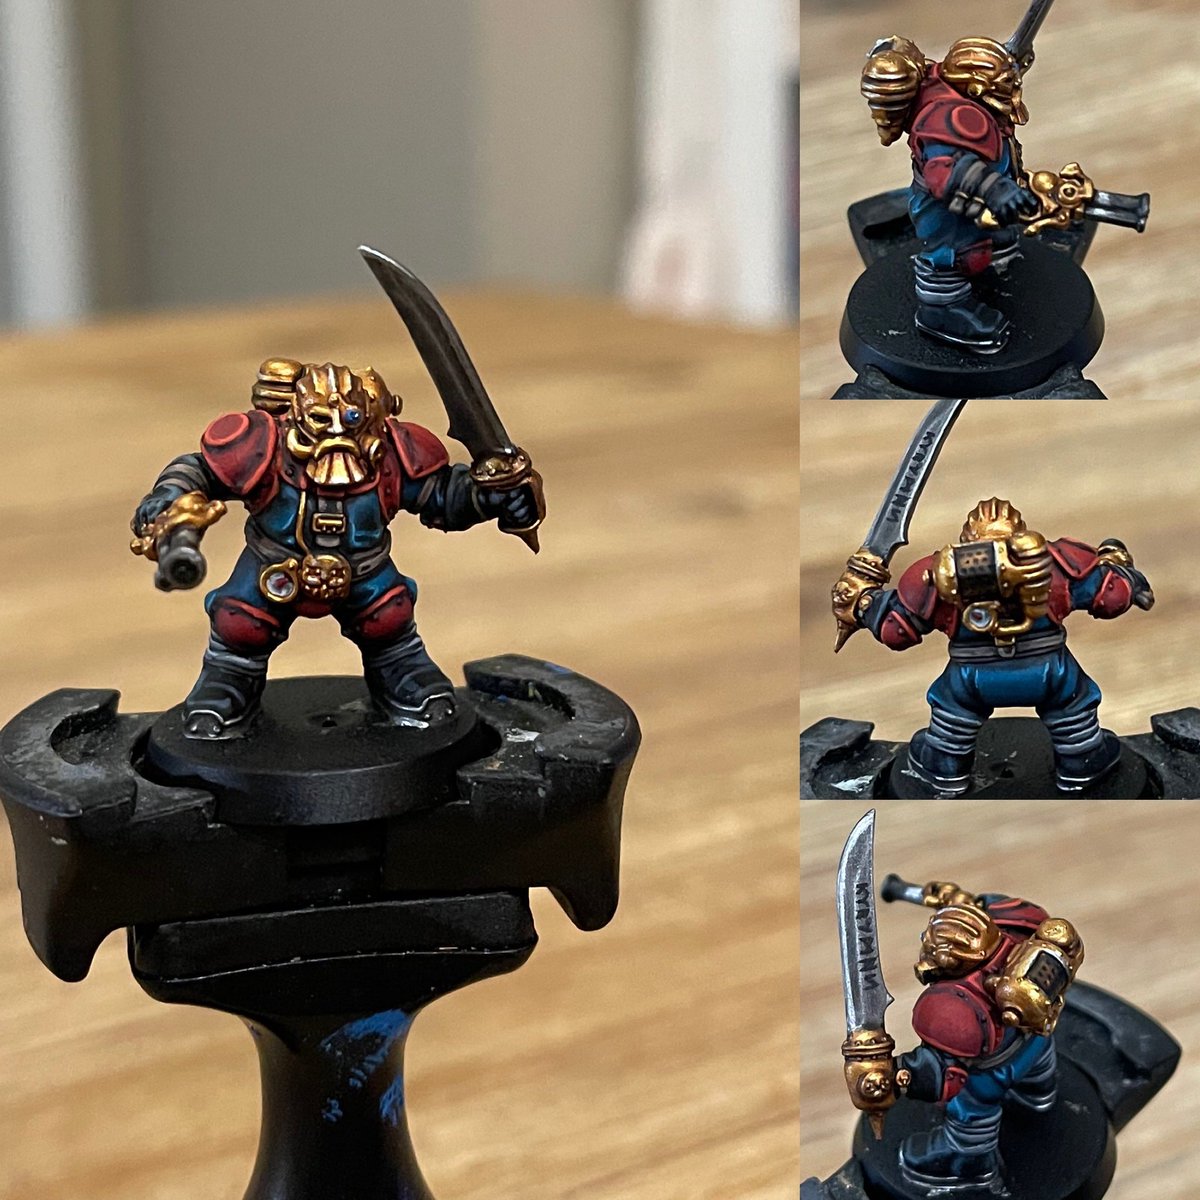 Painted this cool Kharadron Overlord for @cabdialectic. I still need to do the base. I like how he turned out. #WarhammerCommunity #warmongers #ageofsigmar